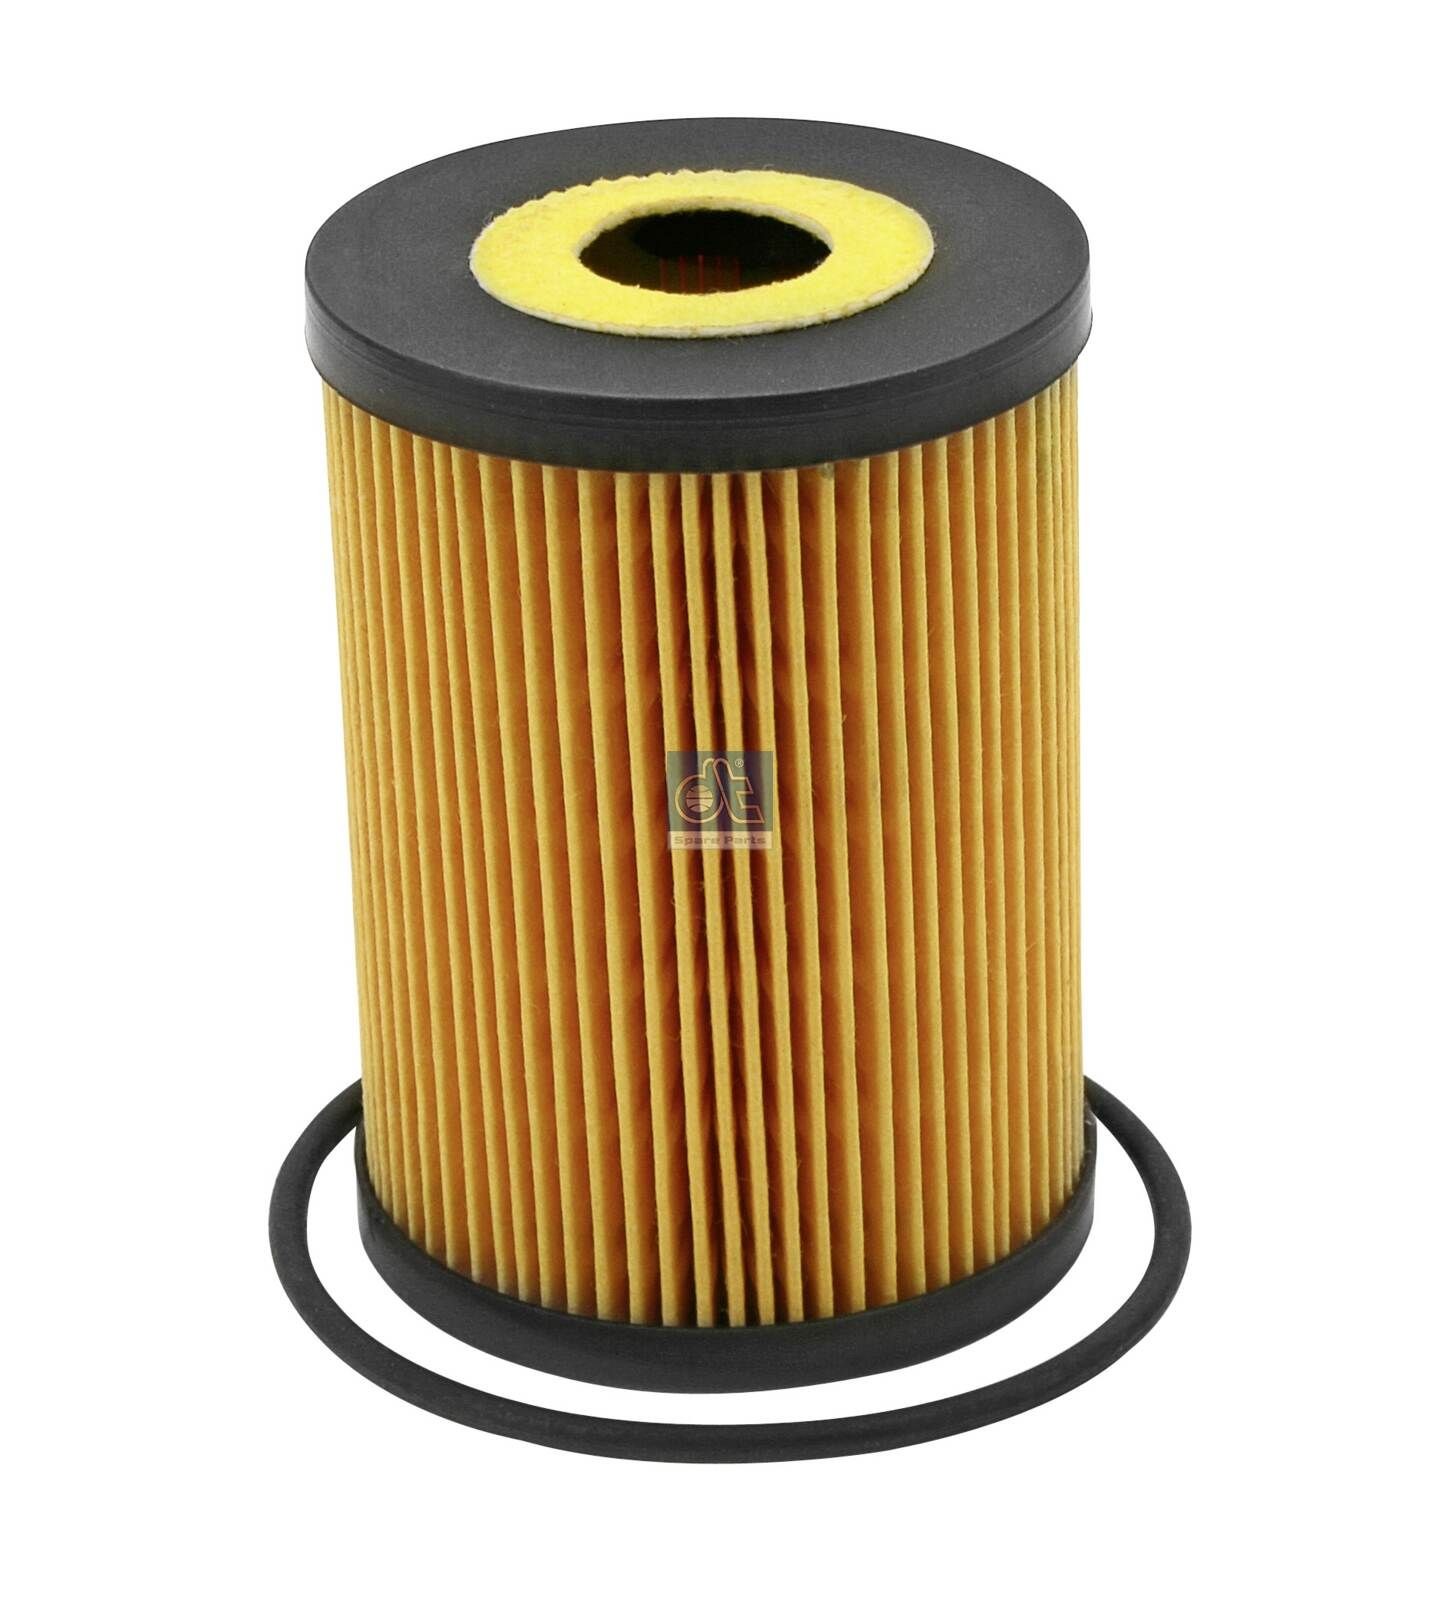 HU 825 x DT Spare Parts 6.33215 Oil filter 7701 057 827